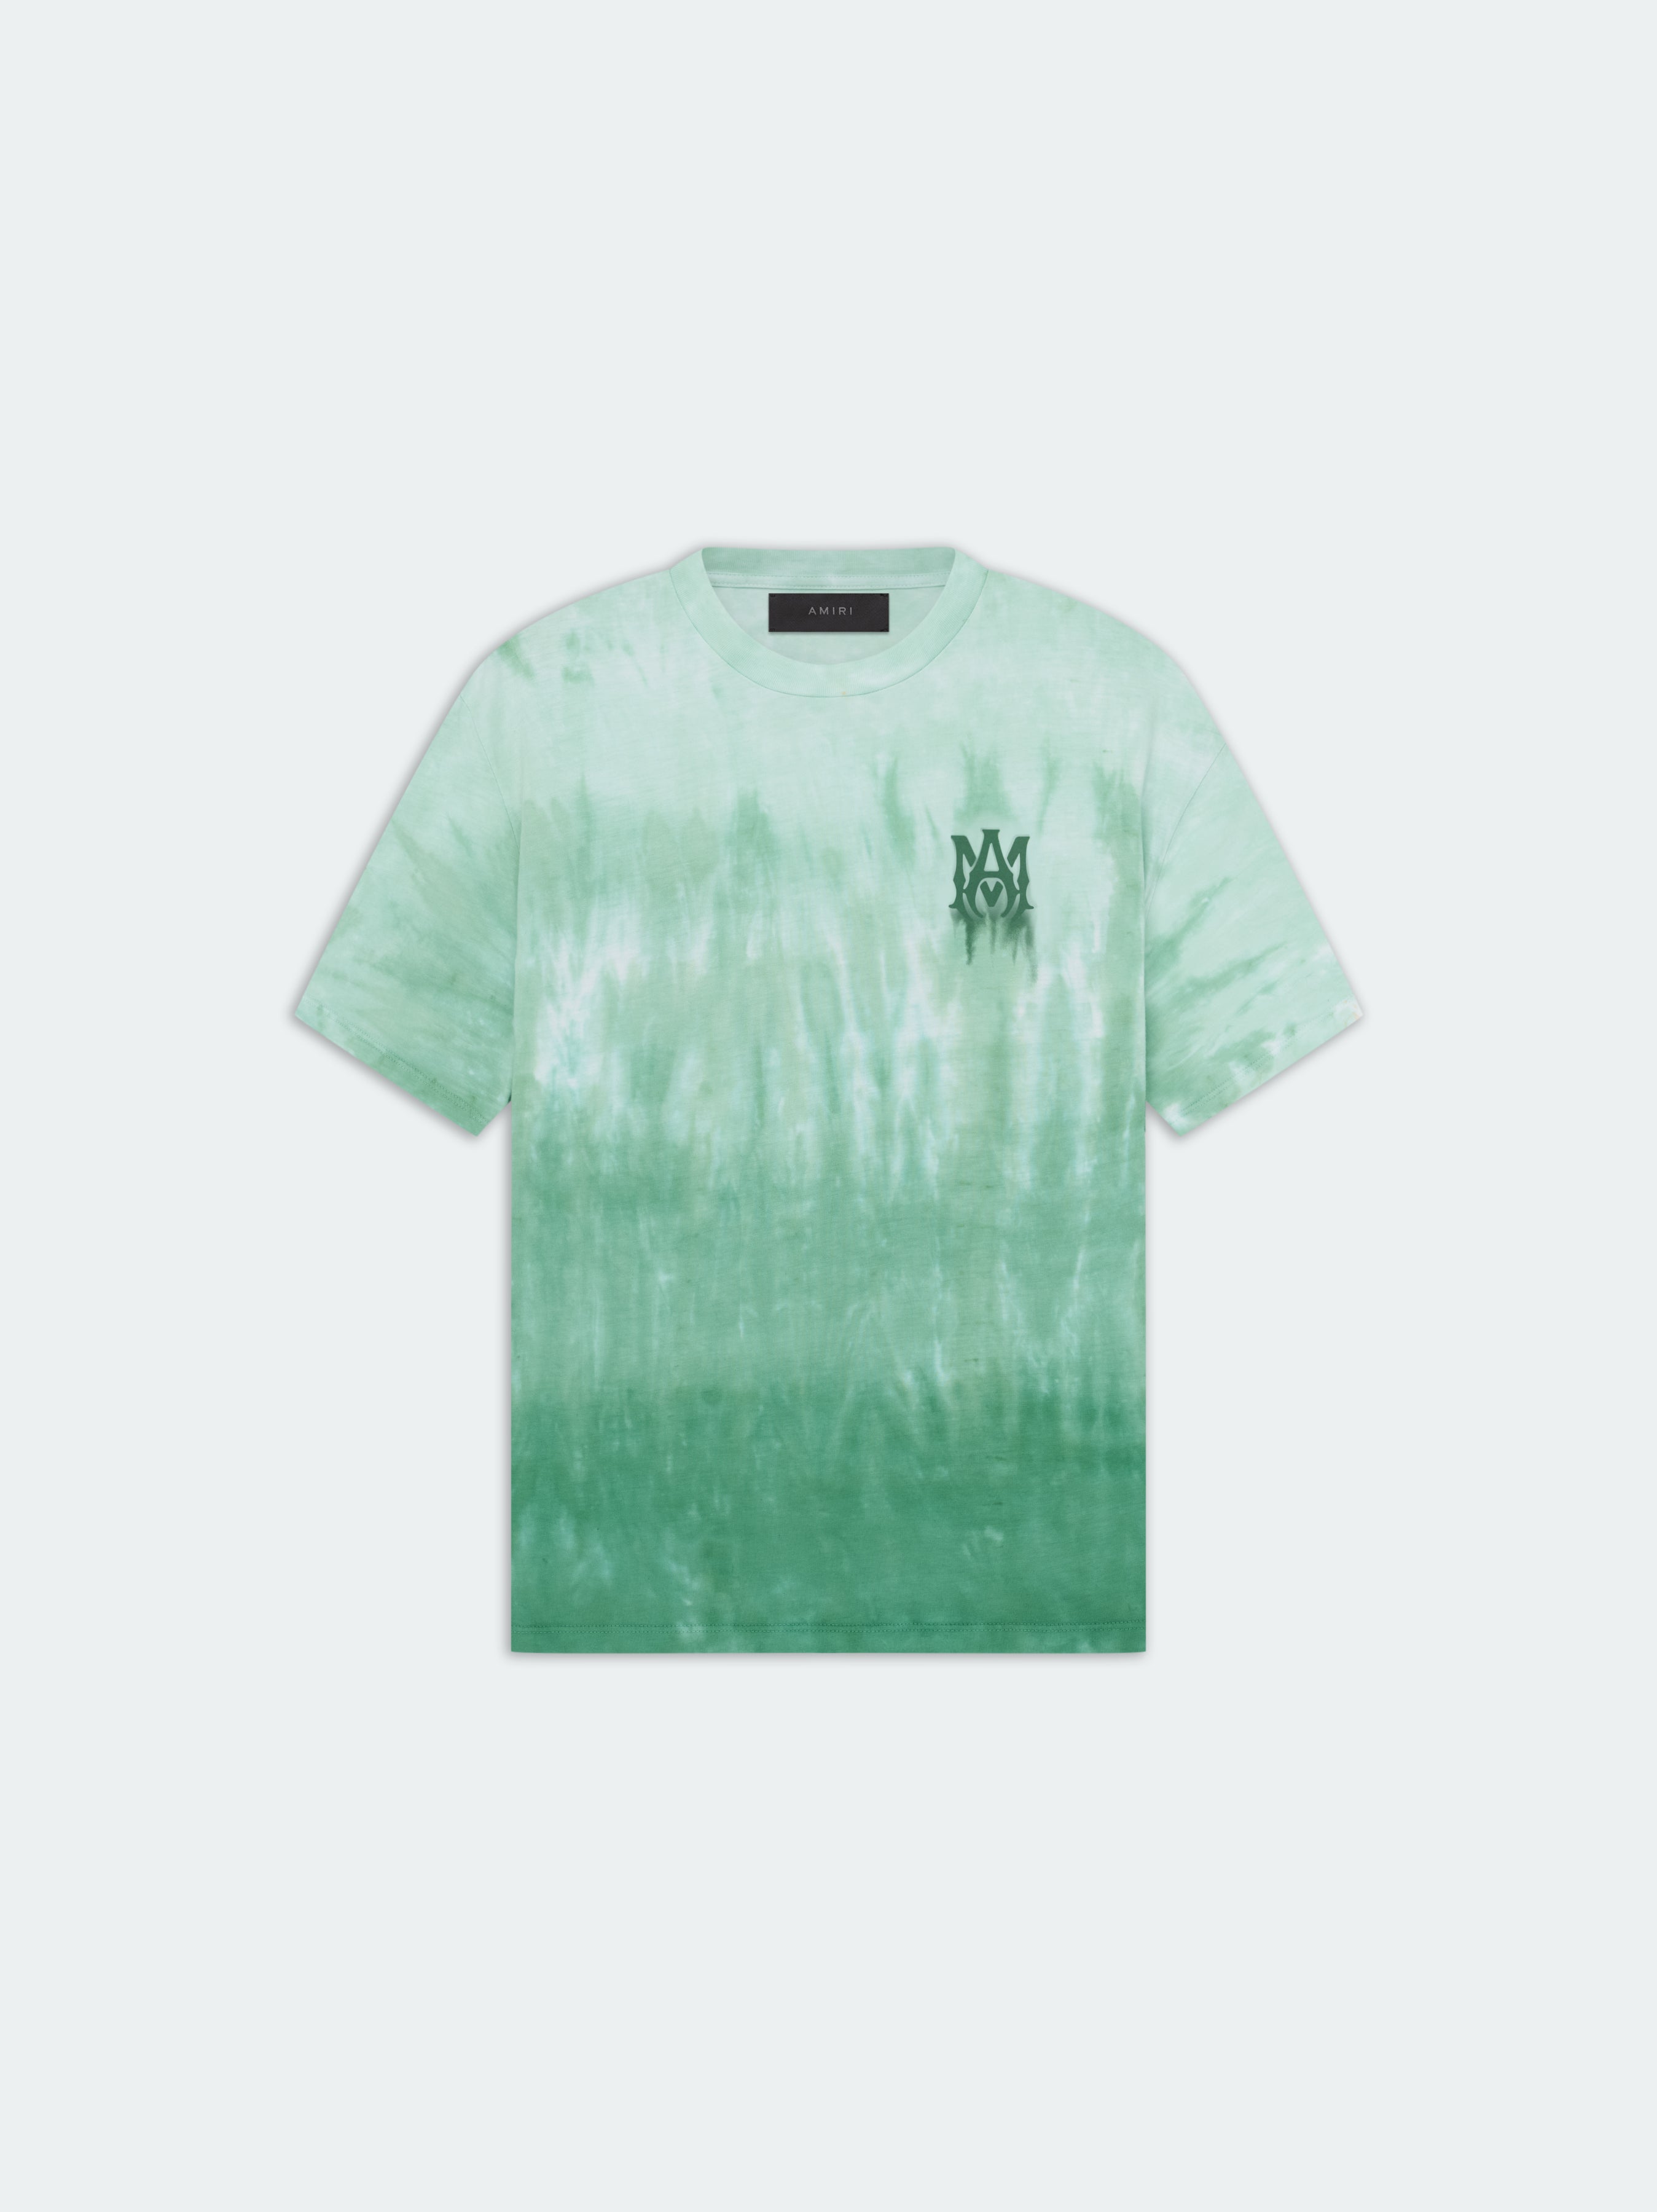 Product MA LOGO DIP DYE TEE - Mineral Green featured image